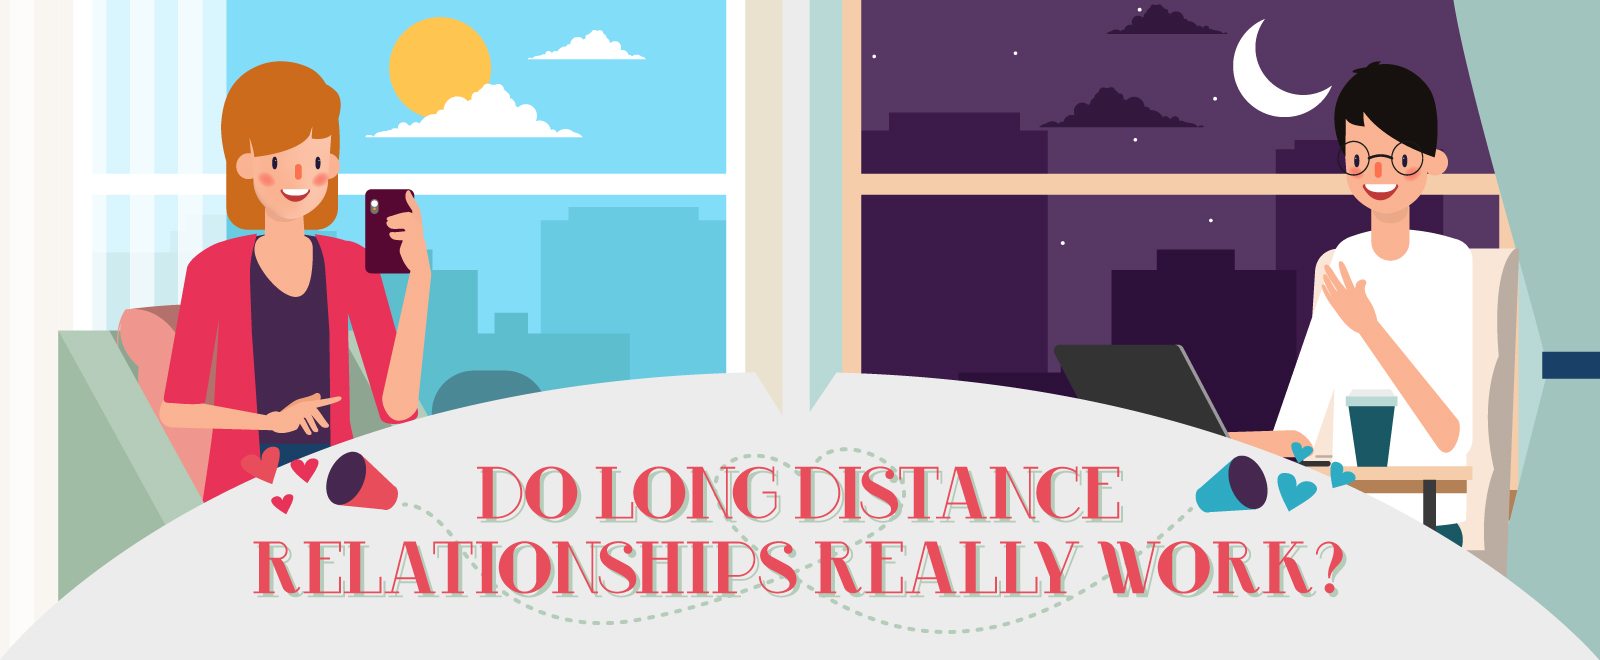 Do Long Distance Relationships Really Work? (An Infographic)